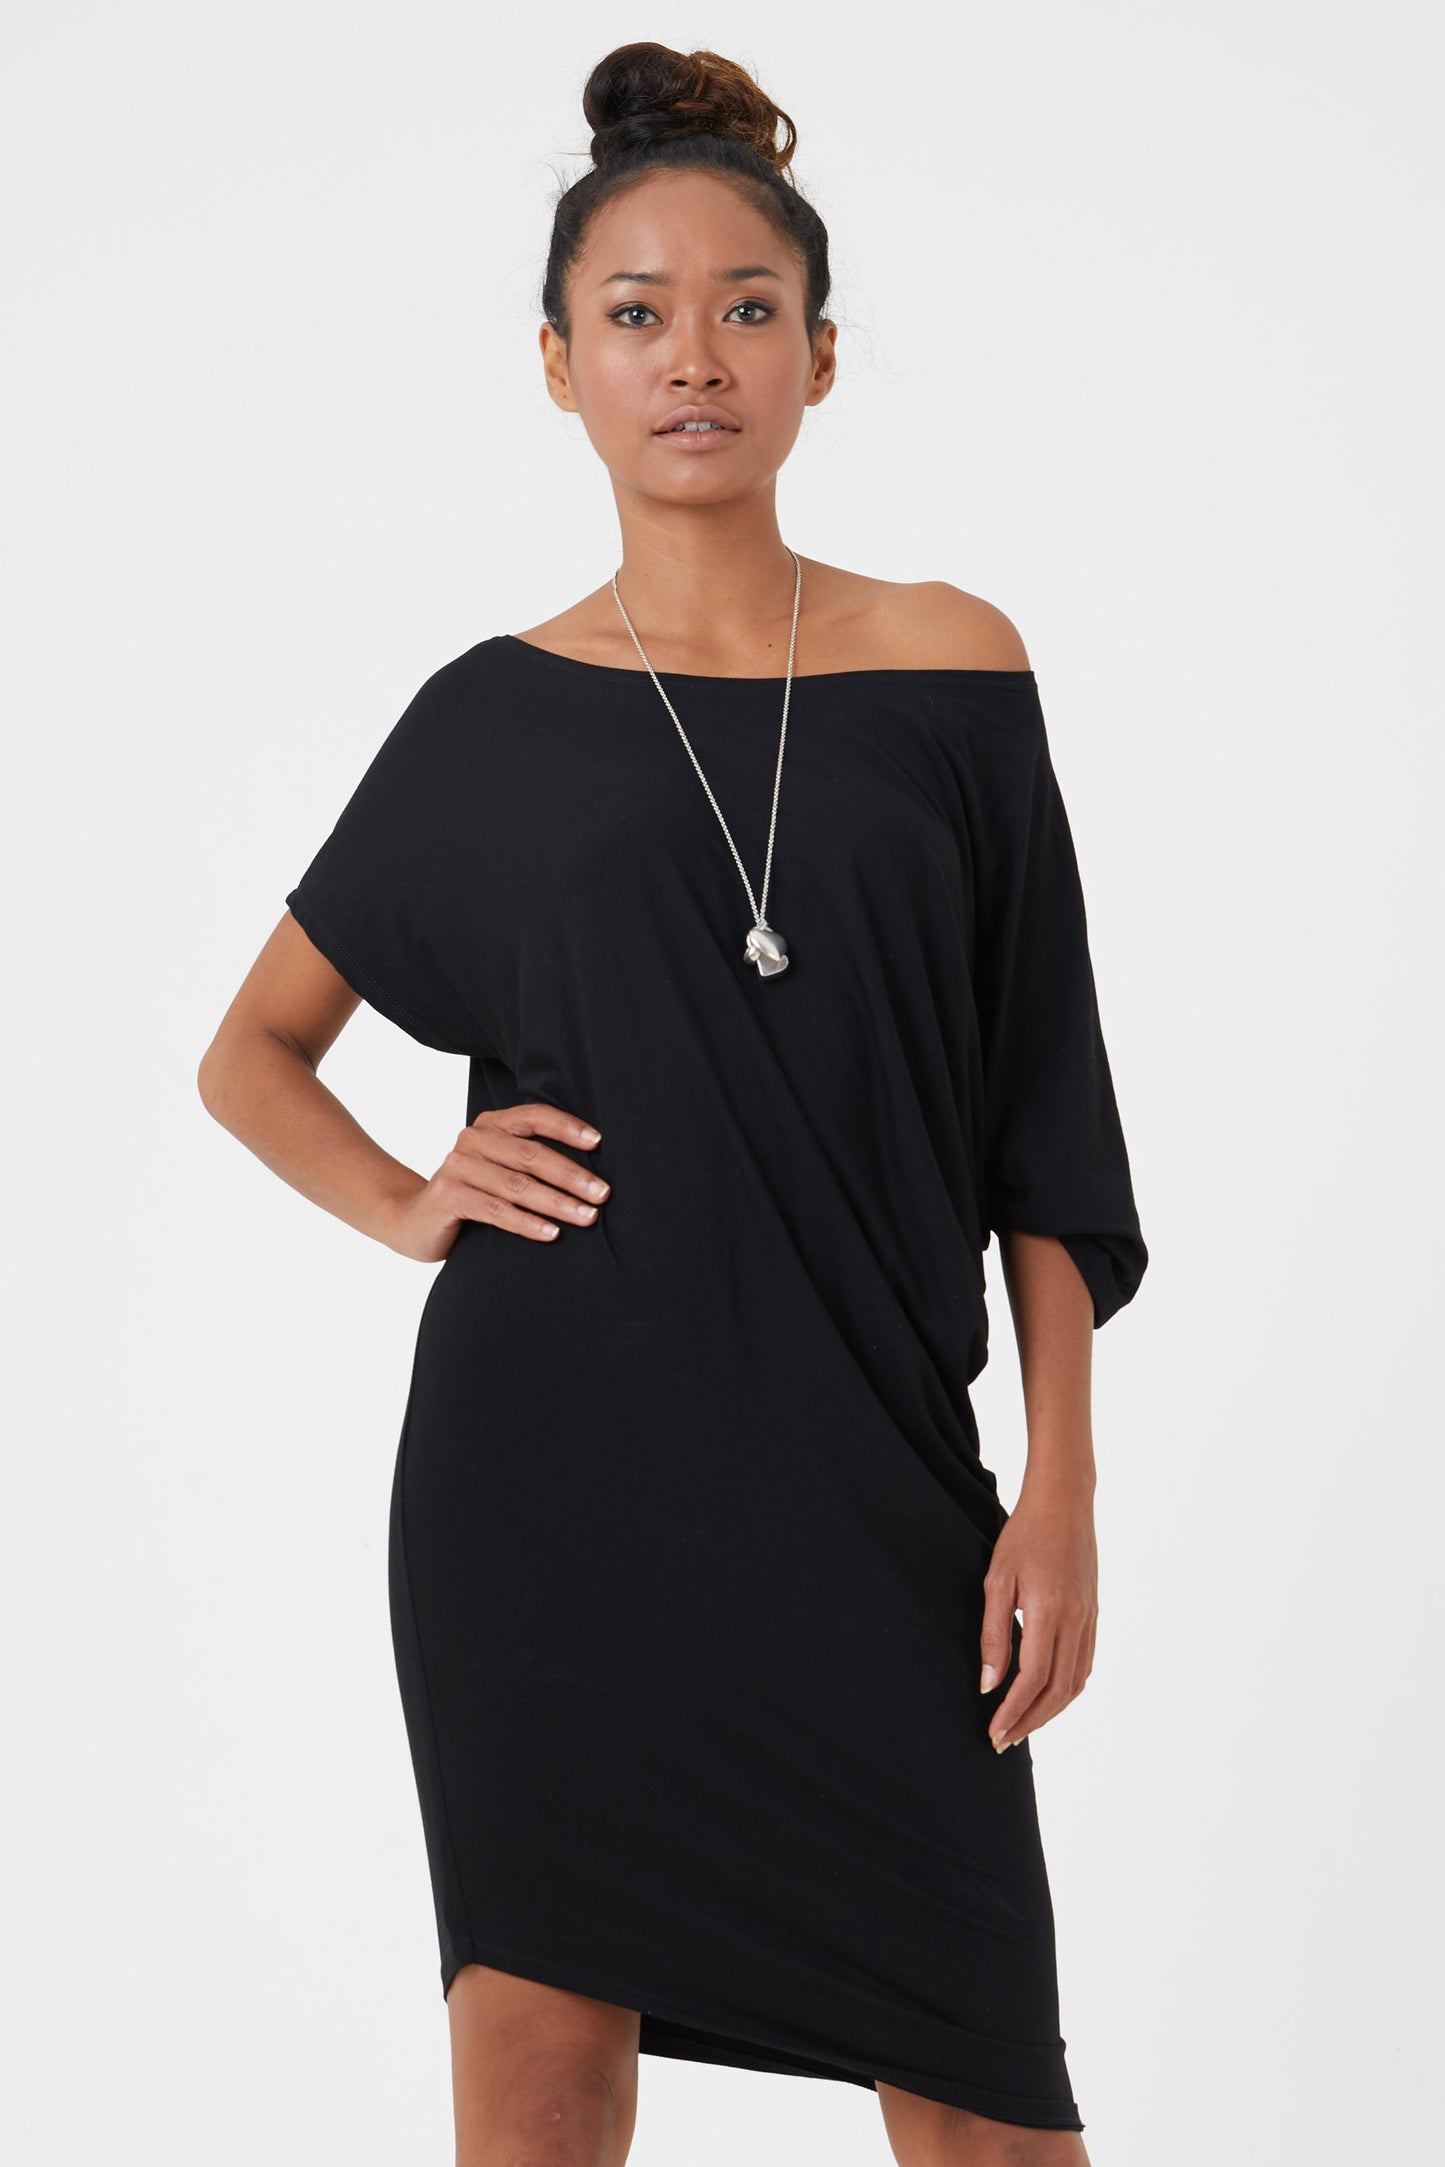 Women's Black Jersey Dress Perfect for Expectant  Mums